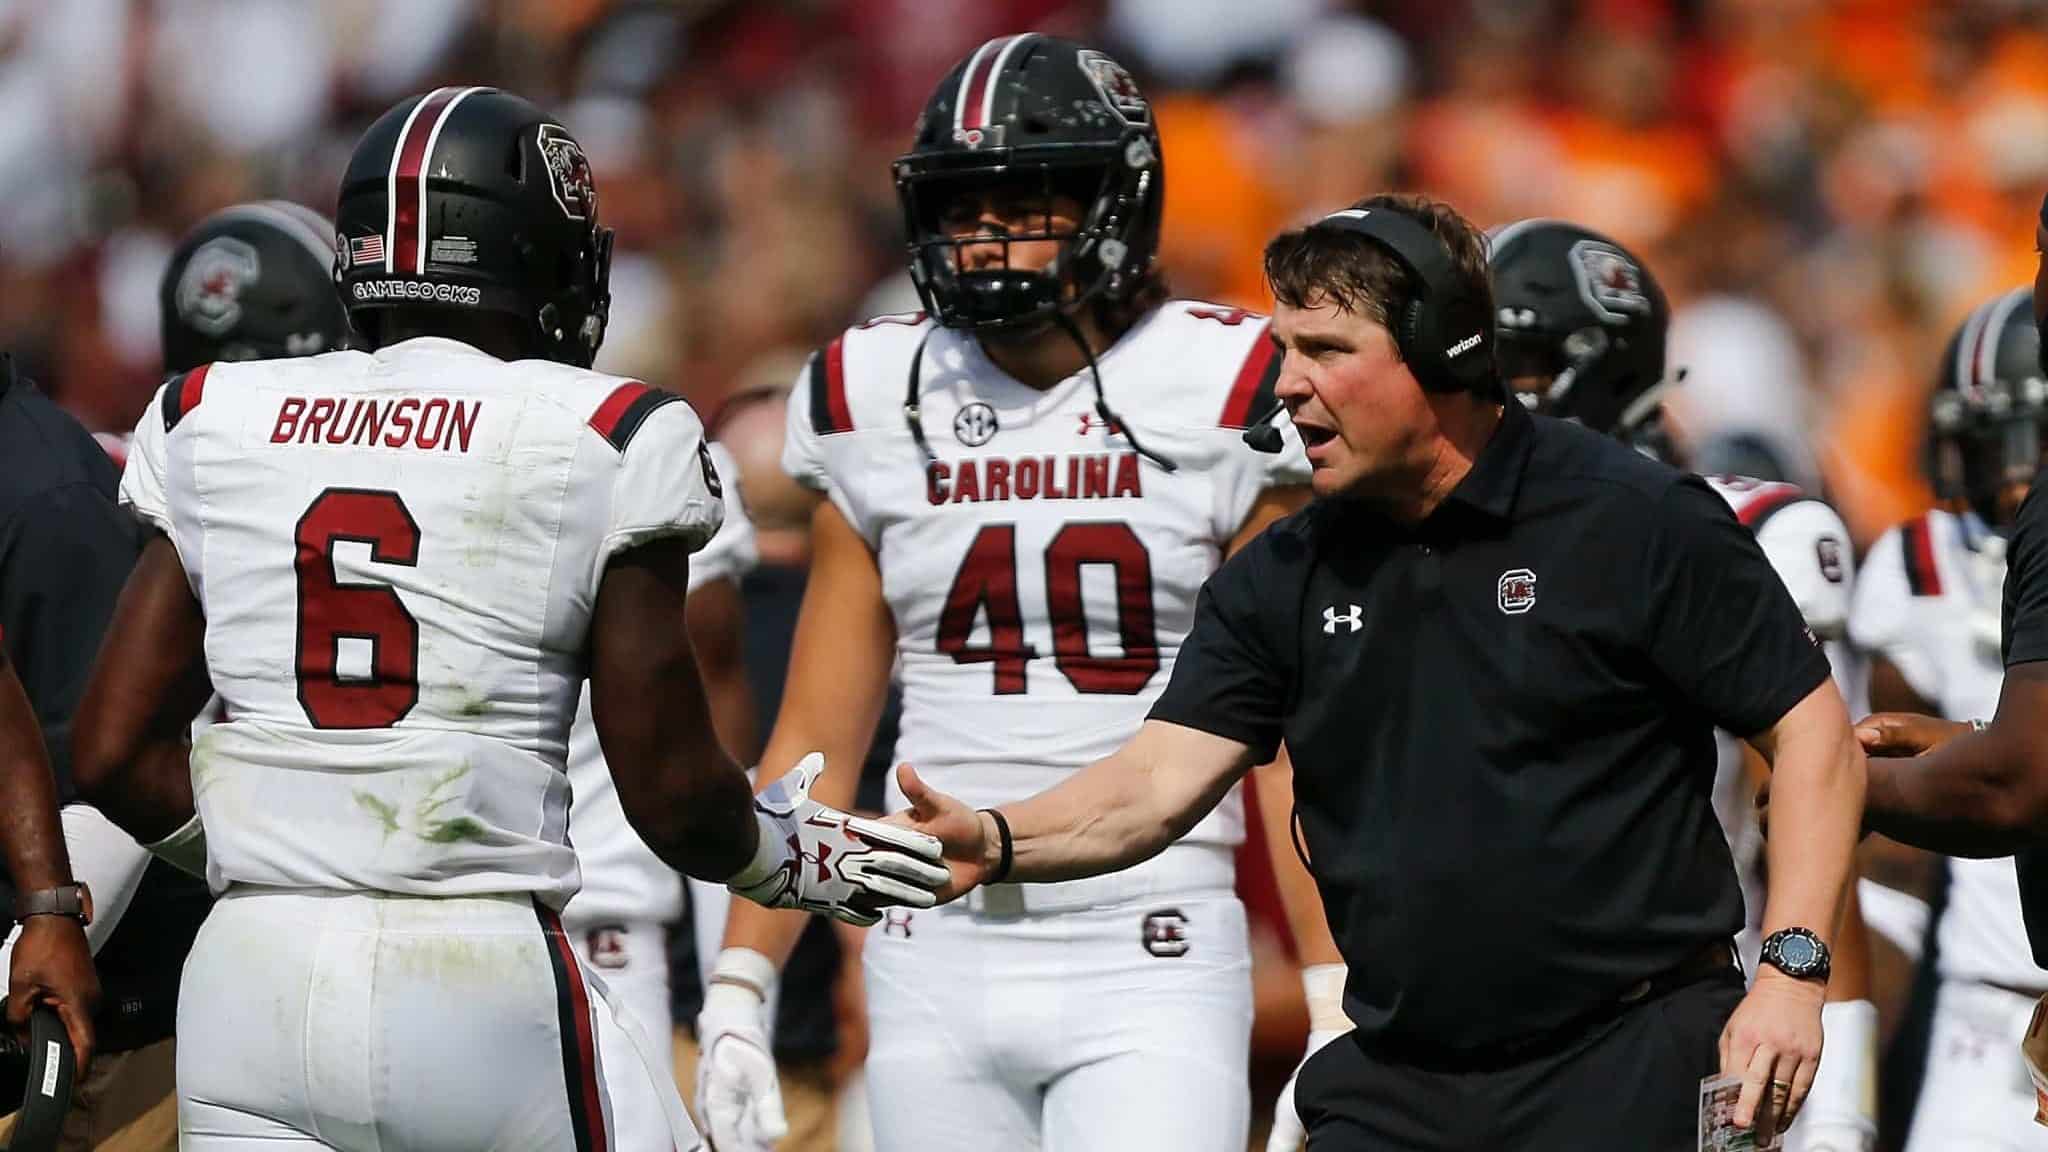 KNOXVILLE, TN - OCTOBER 14: Head coach Will Muschamp of the South Carolina Gamecocks celebrates with T.J. Brunson #6 against the Tennessee Volunteers during the first half at Neyland Stadium on October 14, 2017 in Knoxville, Tennessee.